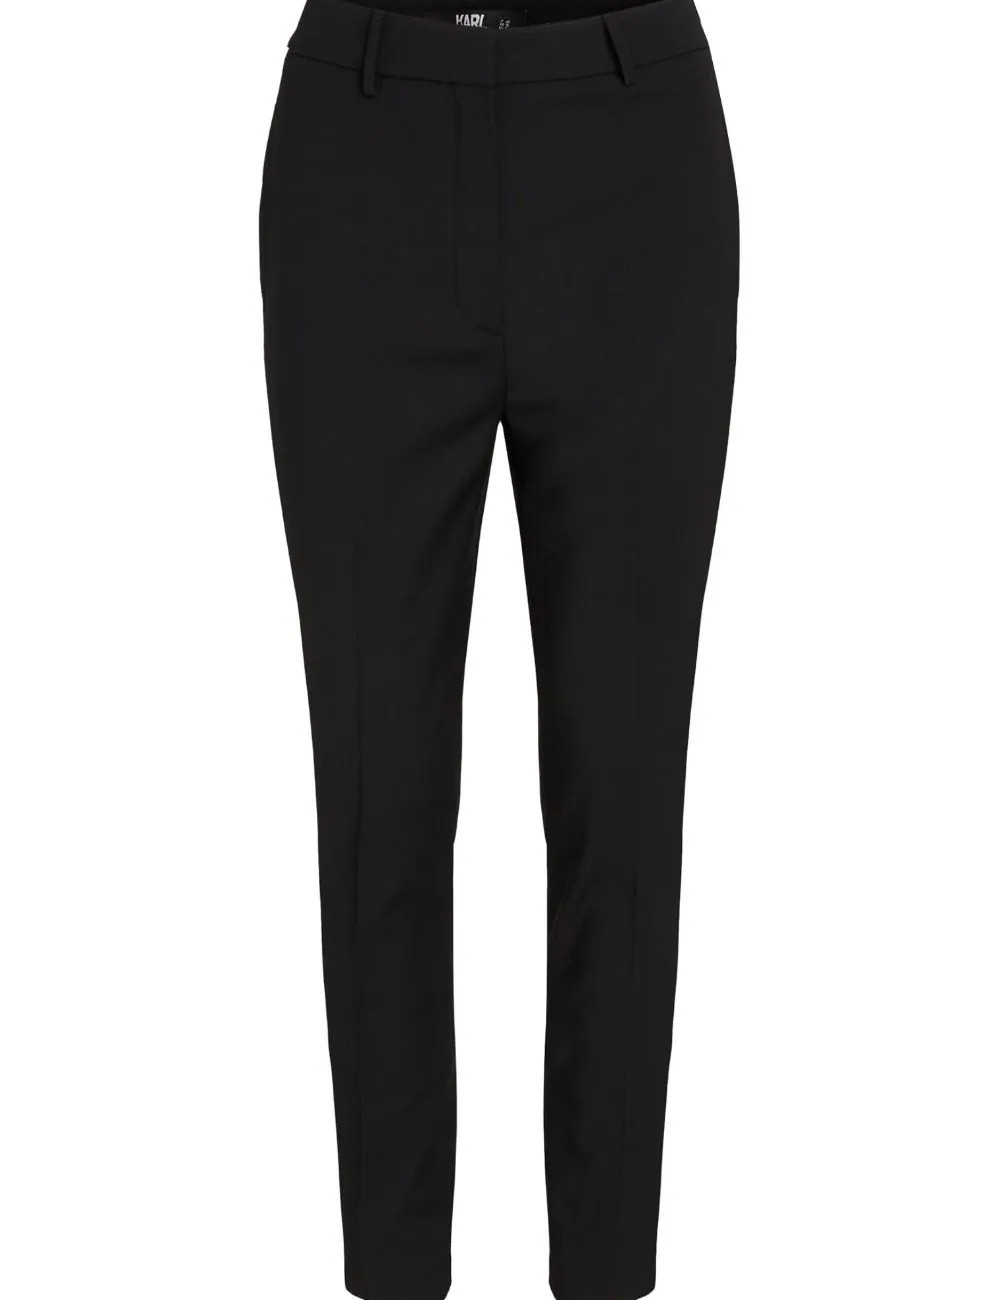 Women's Tailored Trousers